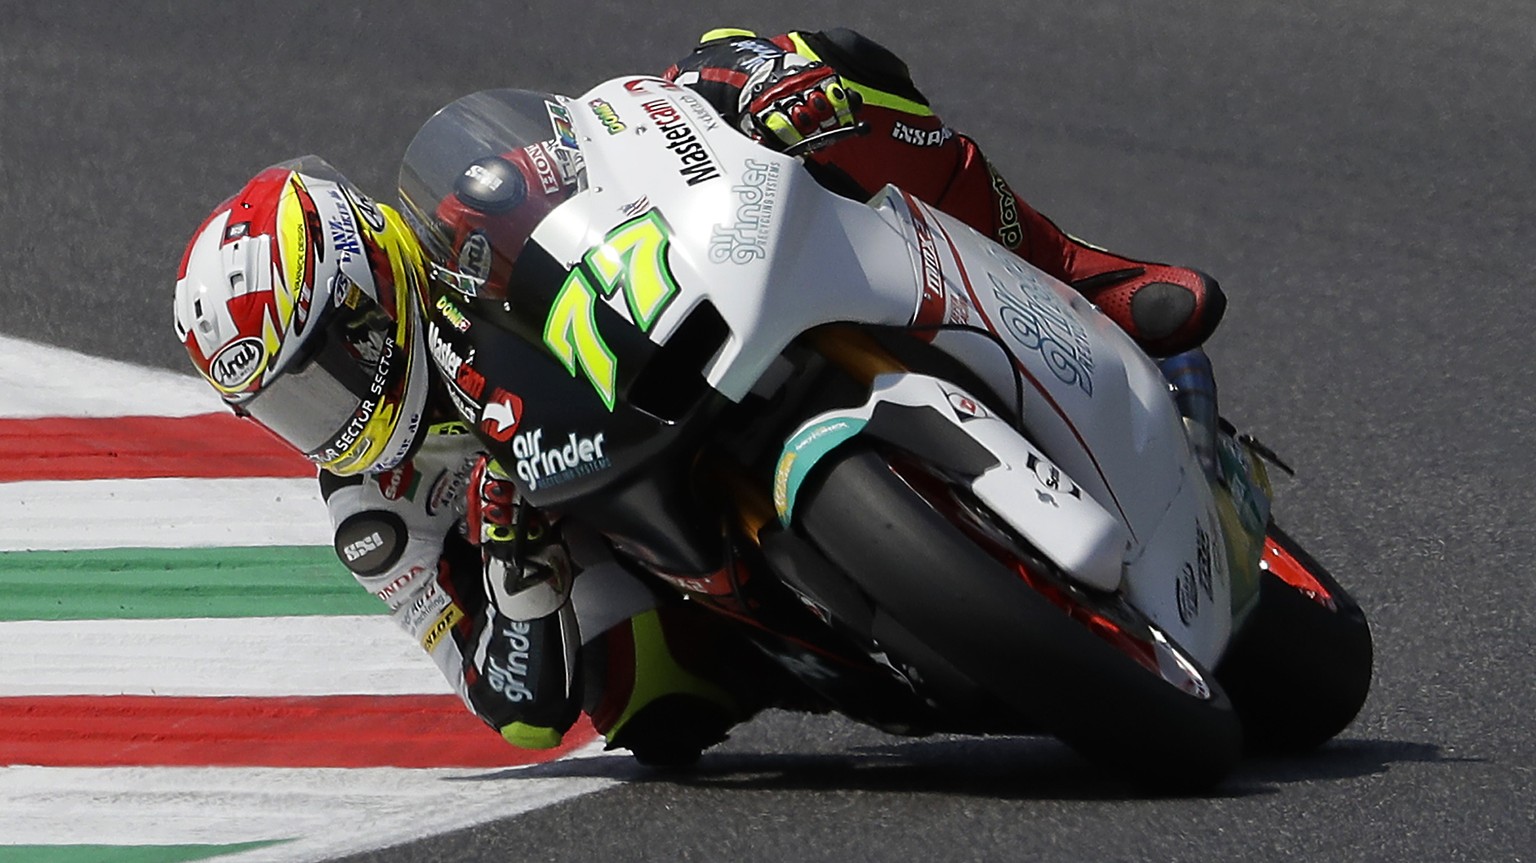 Switzerland&#039;s Dominique Aegerter steers his Kalex during the qualifying session for Sunday&#039;s Italy Moto 2 race, at the Mugello circuit, in Scarperia, Italy, Saturday, June 3, 2017. (AP Photo ...